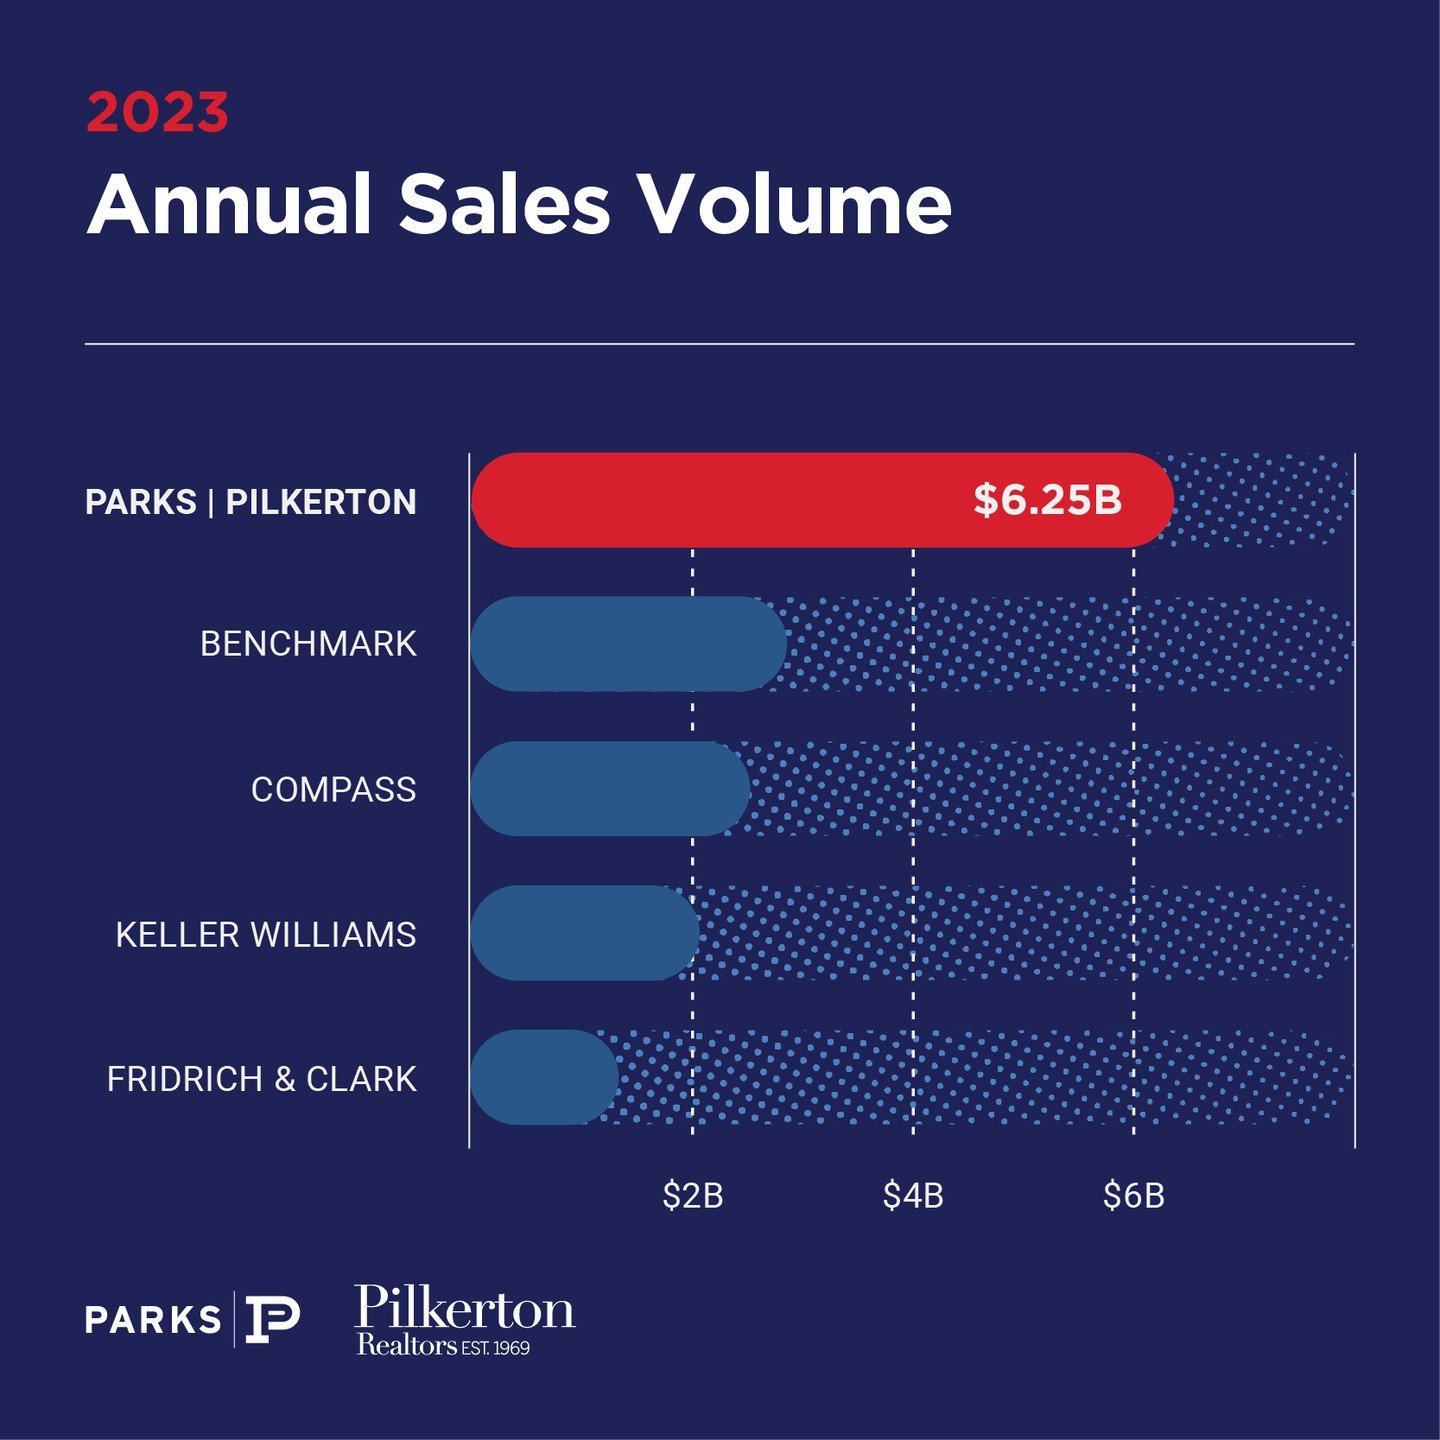 Year after year, Parks | Pilkerton continues to run the show in the Middle TN market! We closed out 2023 with a sales volume of $6.25 billion and a 15% market share, as well as a luxury market share of 20%. 💥👏 @parksathome

Wait until you see how